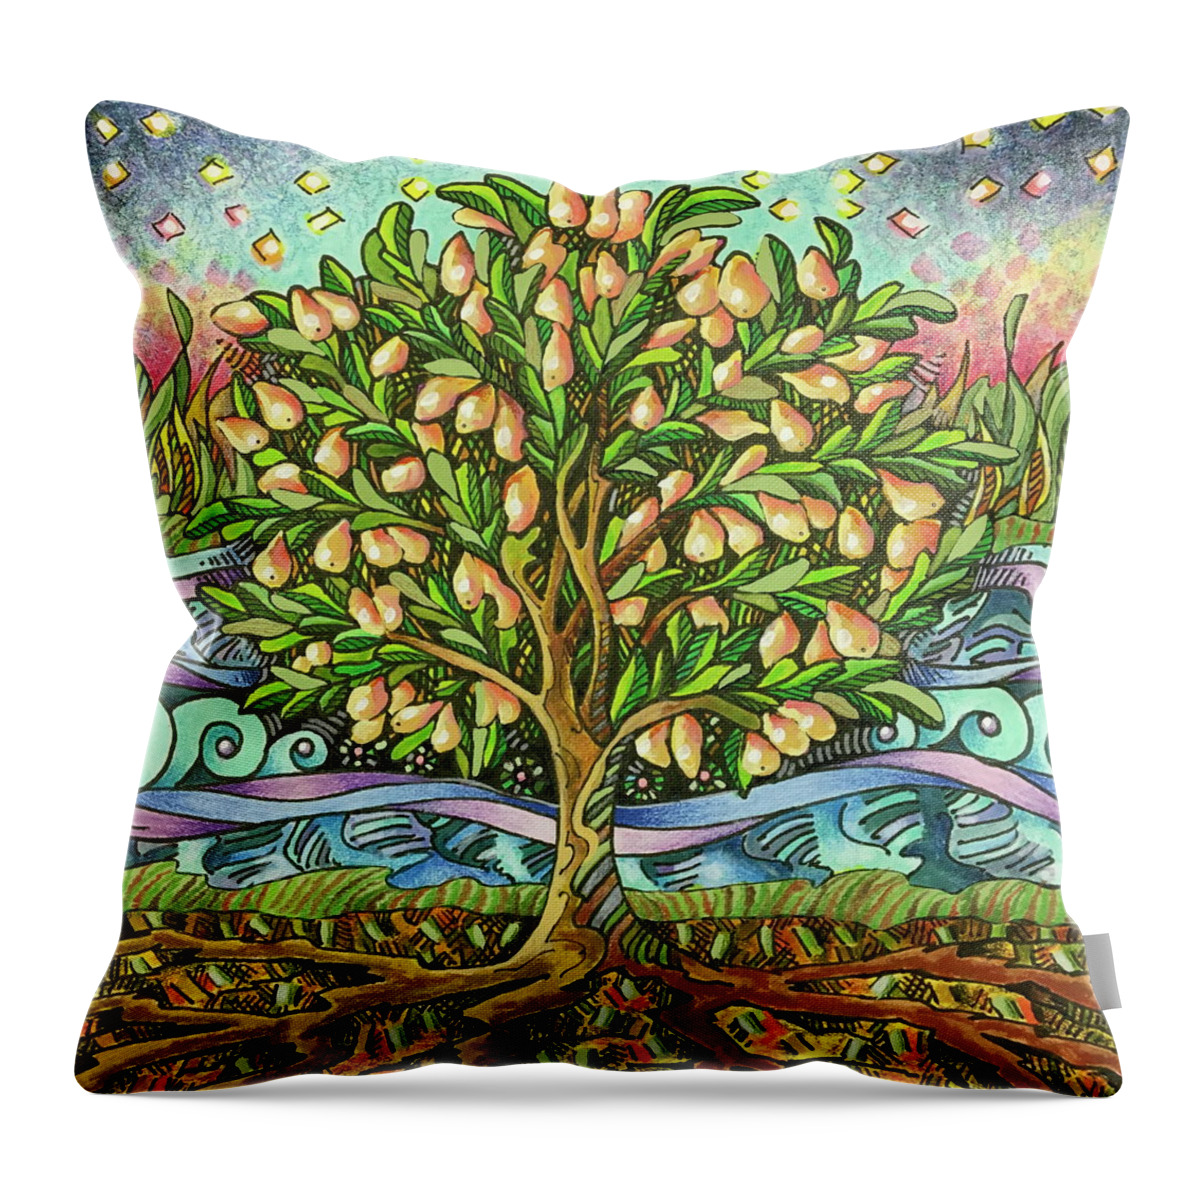  Throw Pillow featuring the drawing Tree By Streams Of Water by Janice A Larson